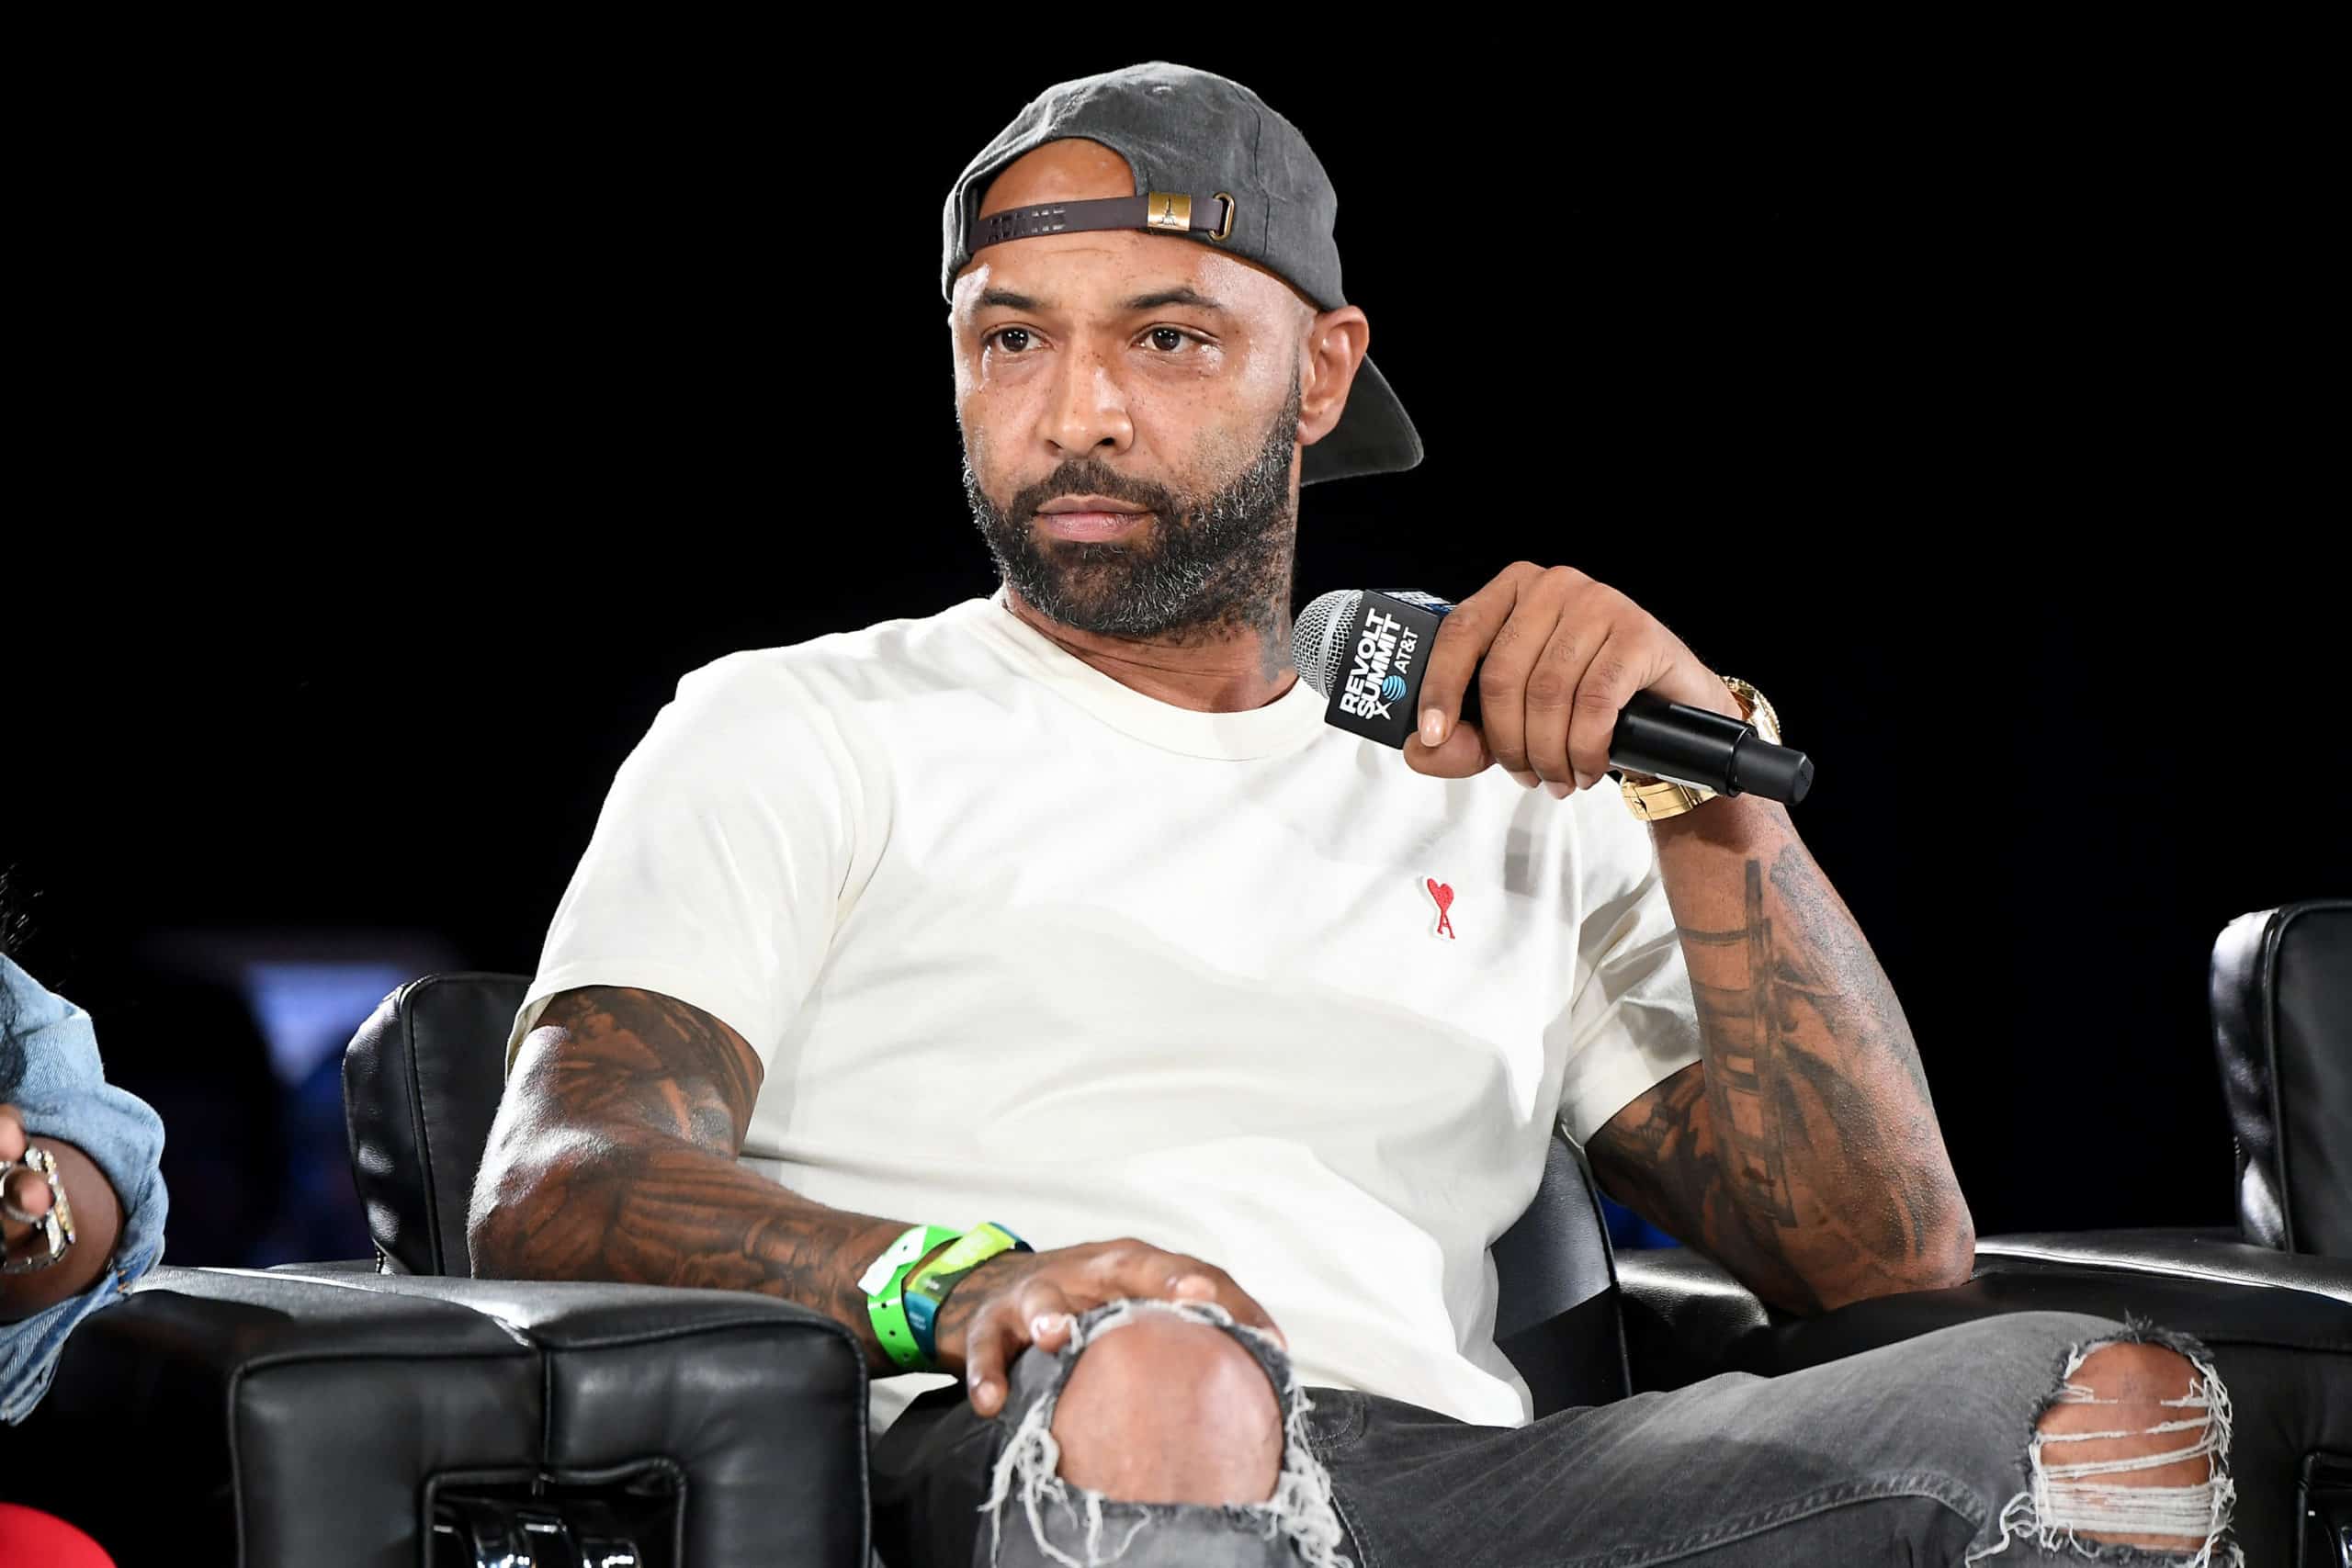 People On Twitter React To Joe Budden Saying He Plays With His Dog's P...